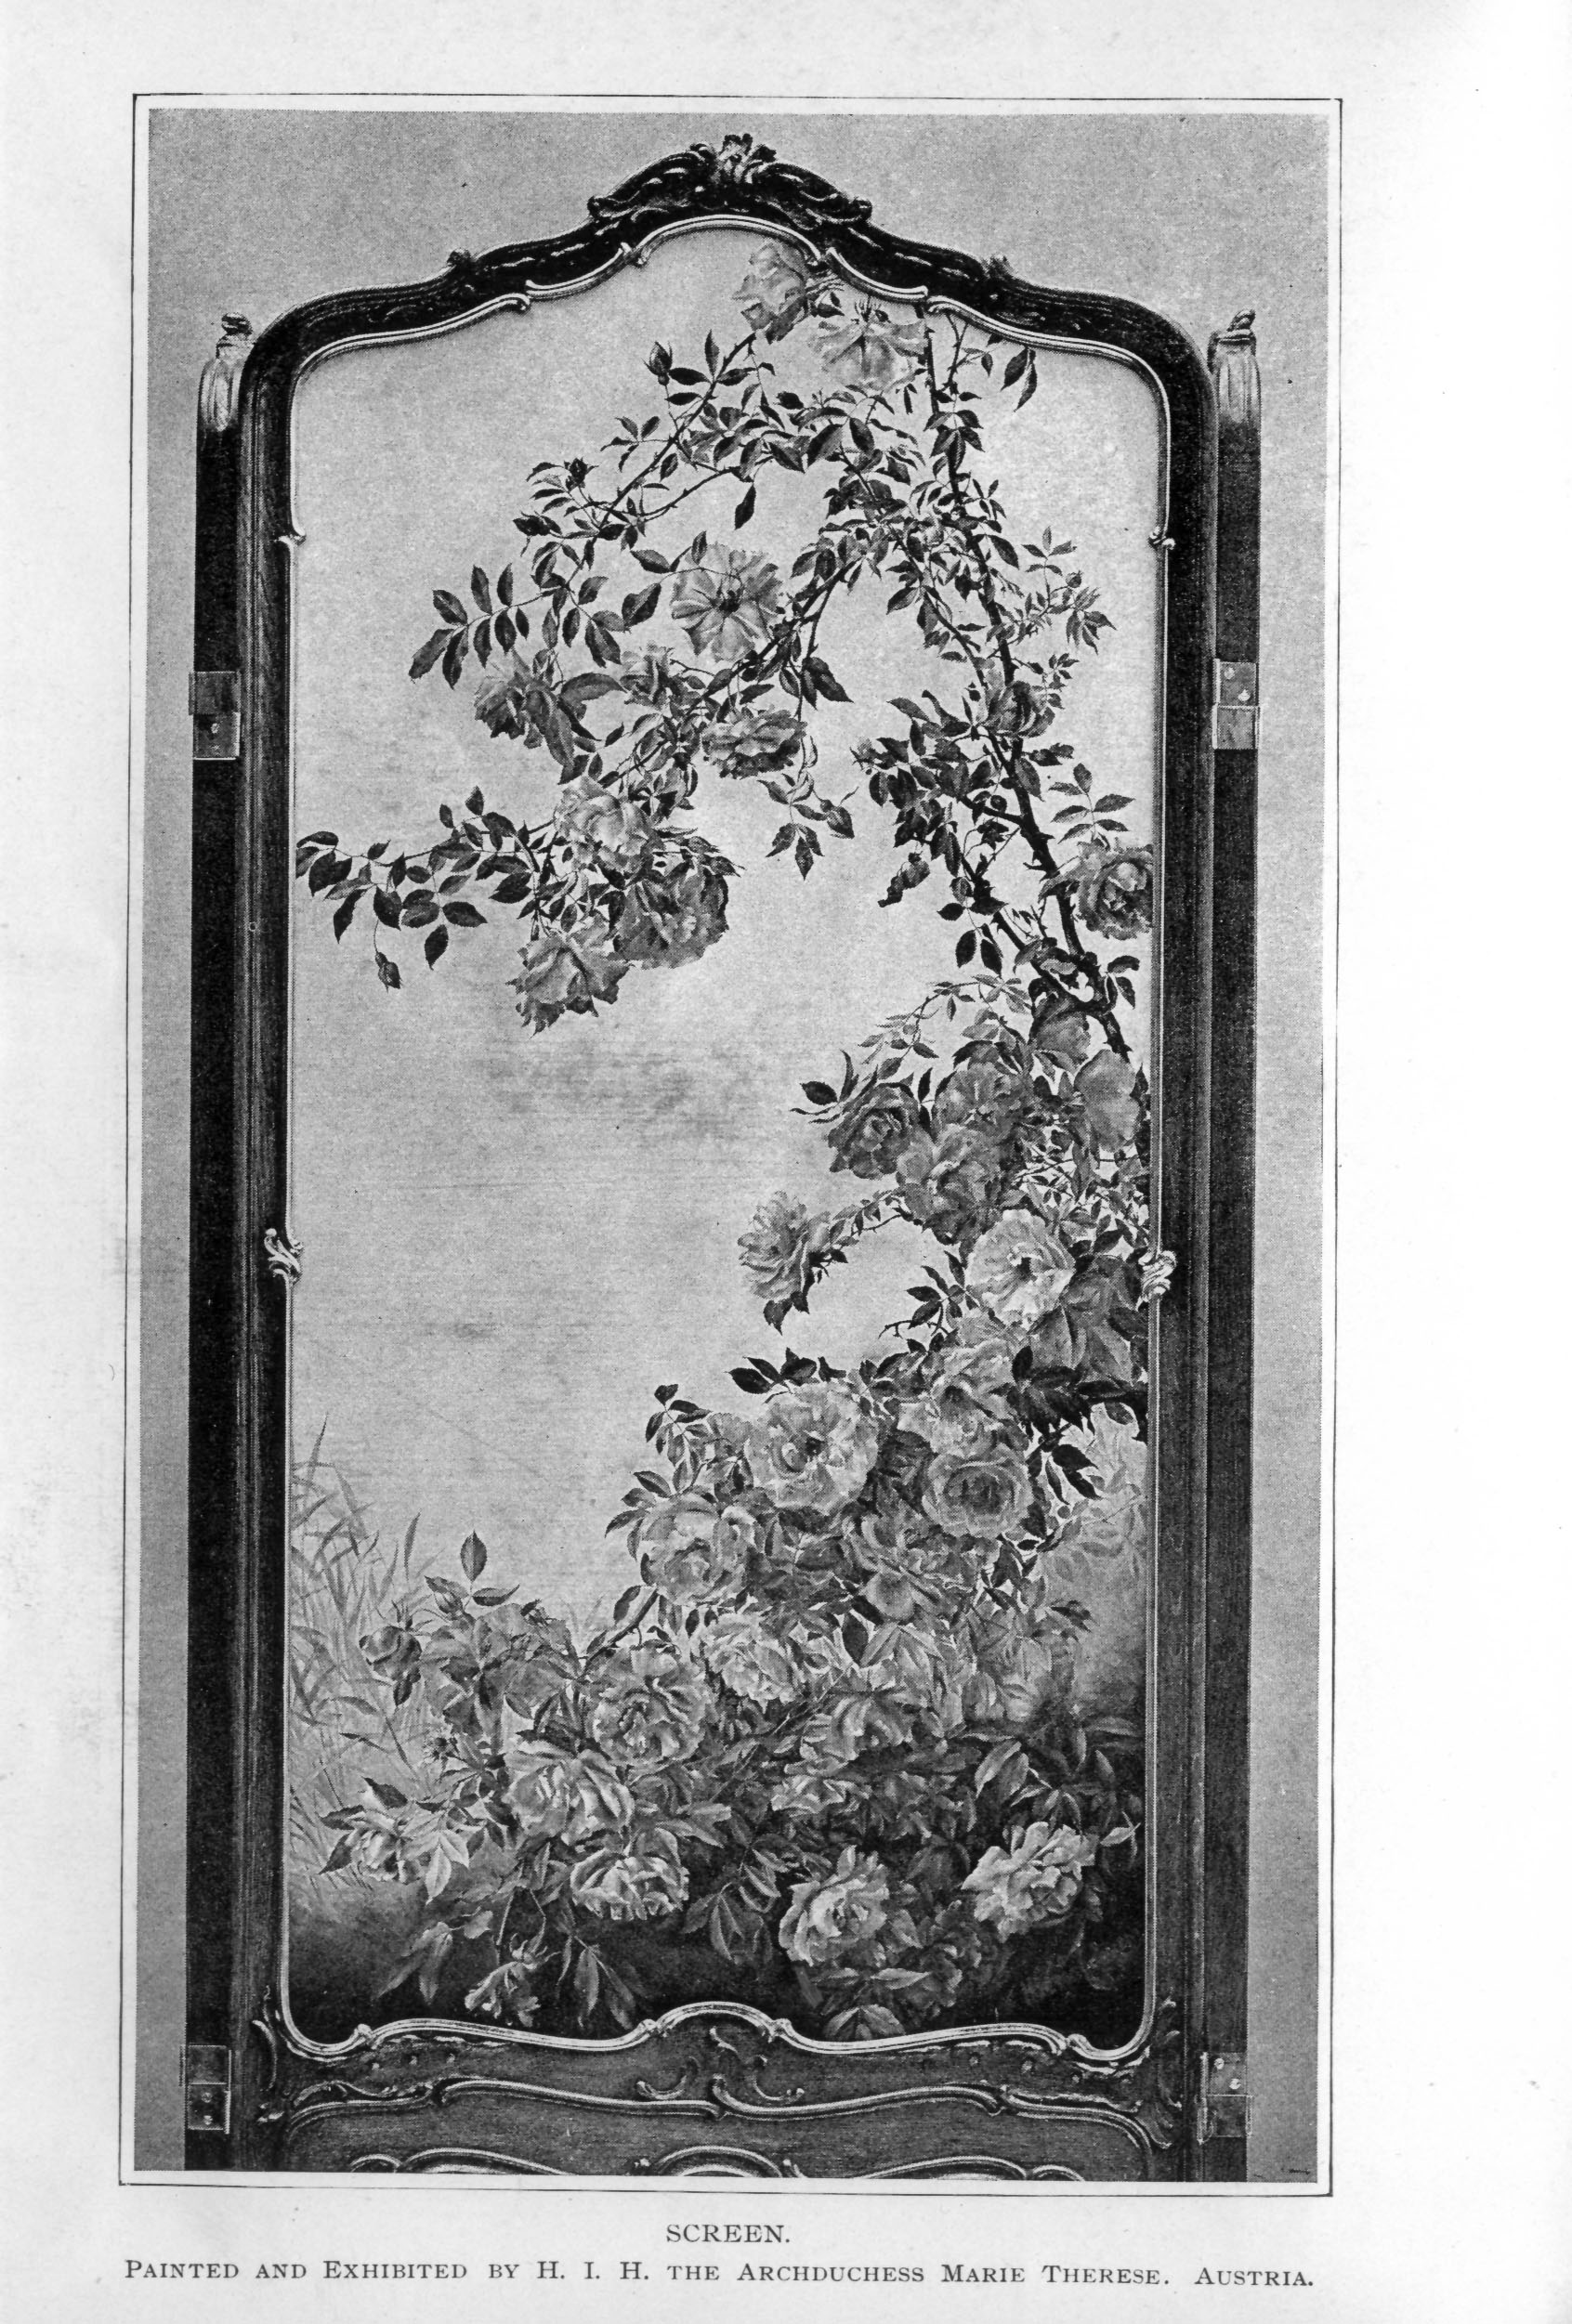 screen painted with flowers